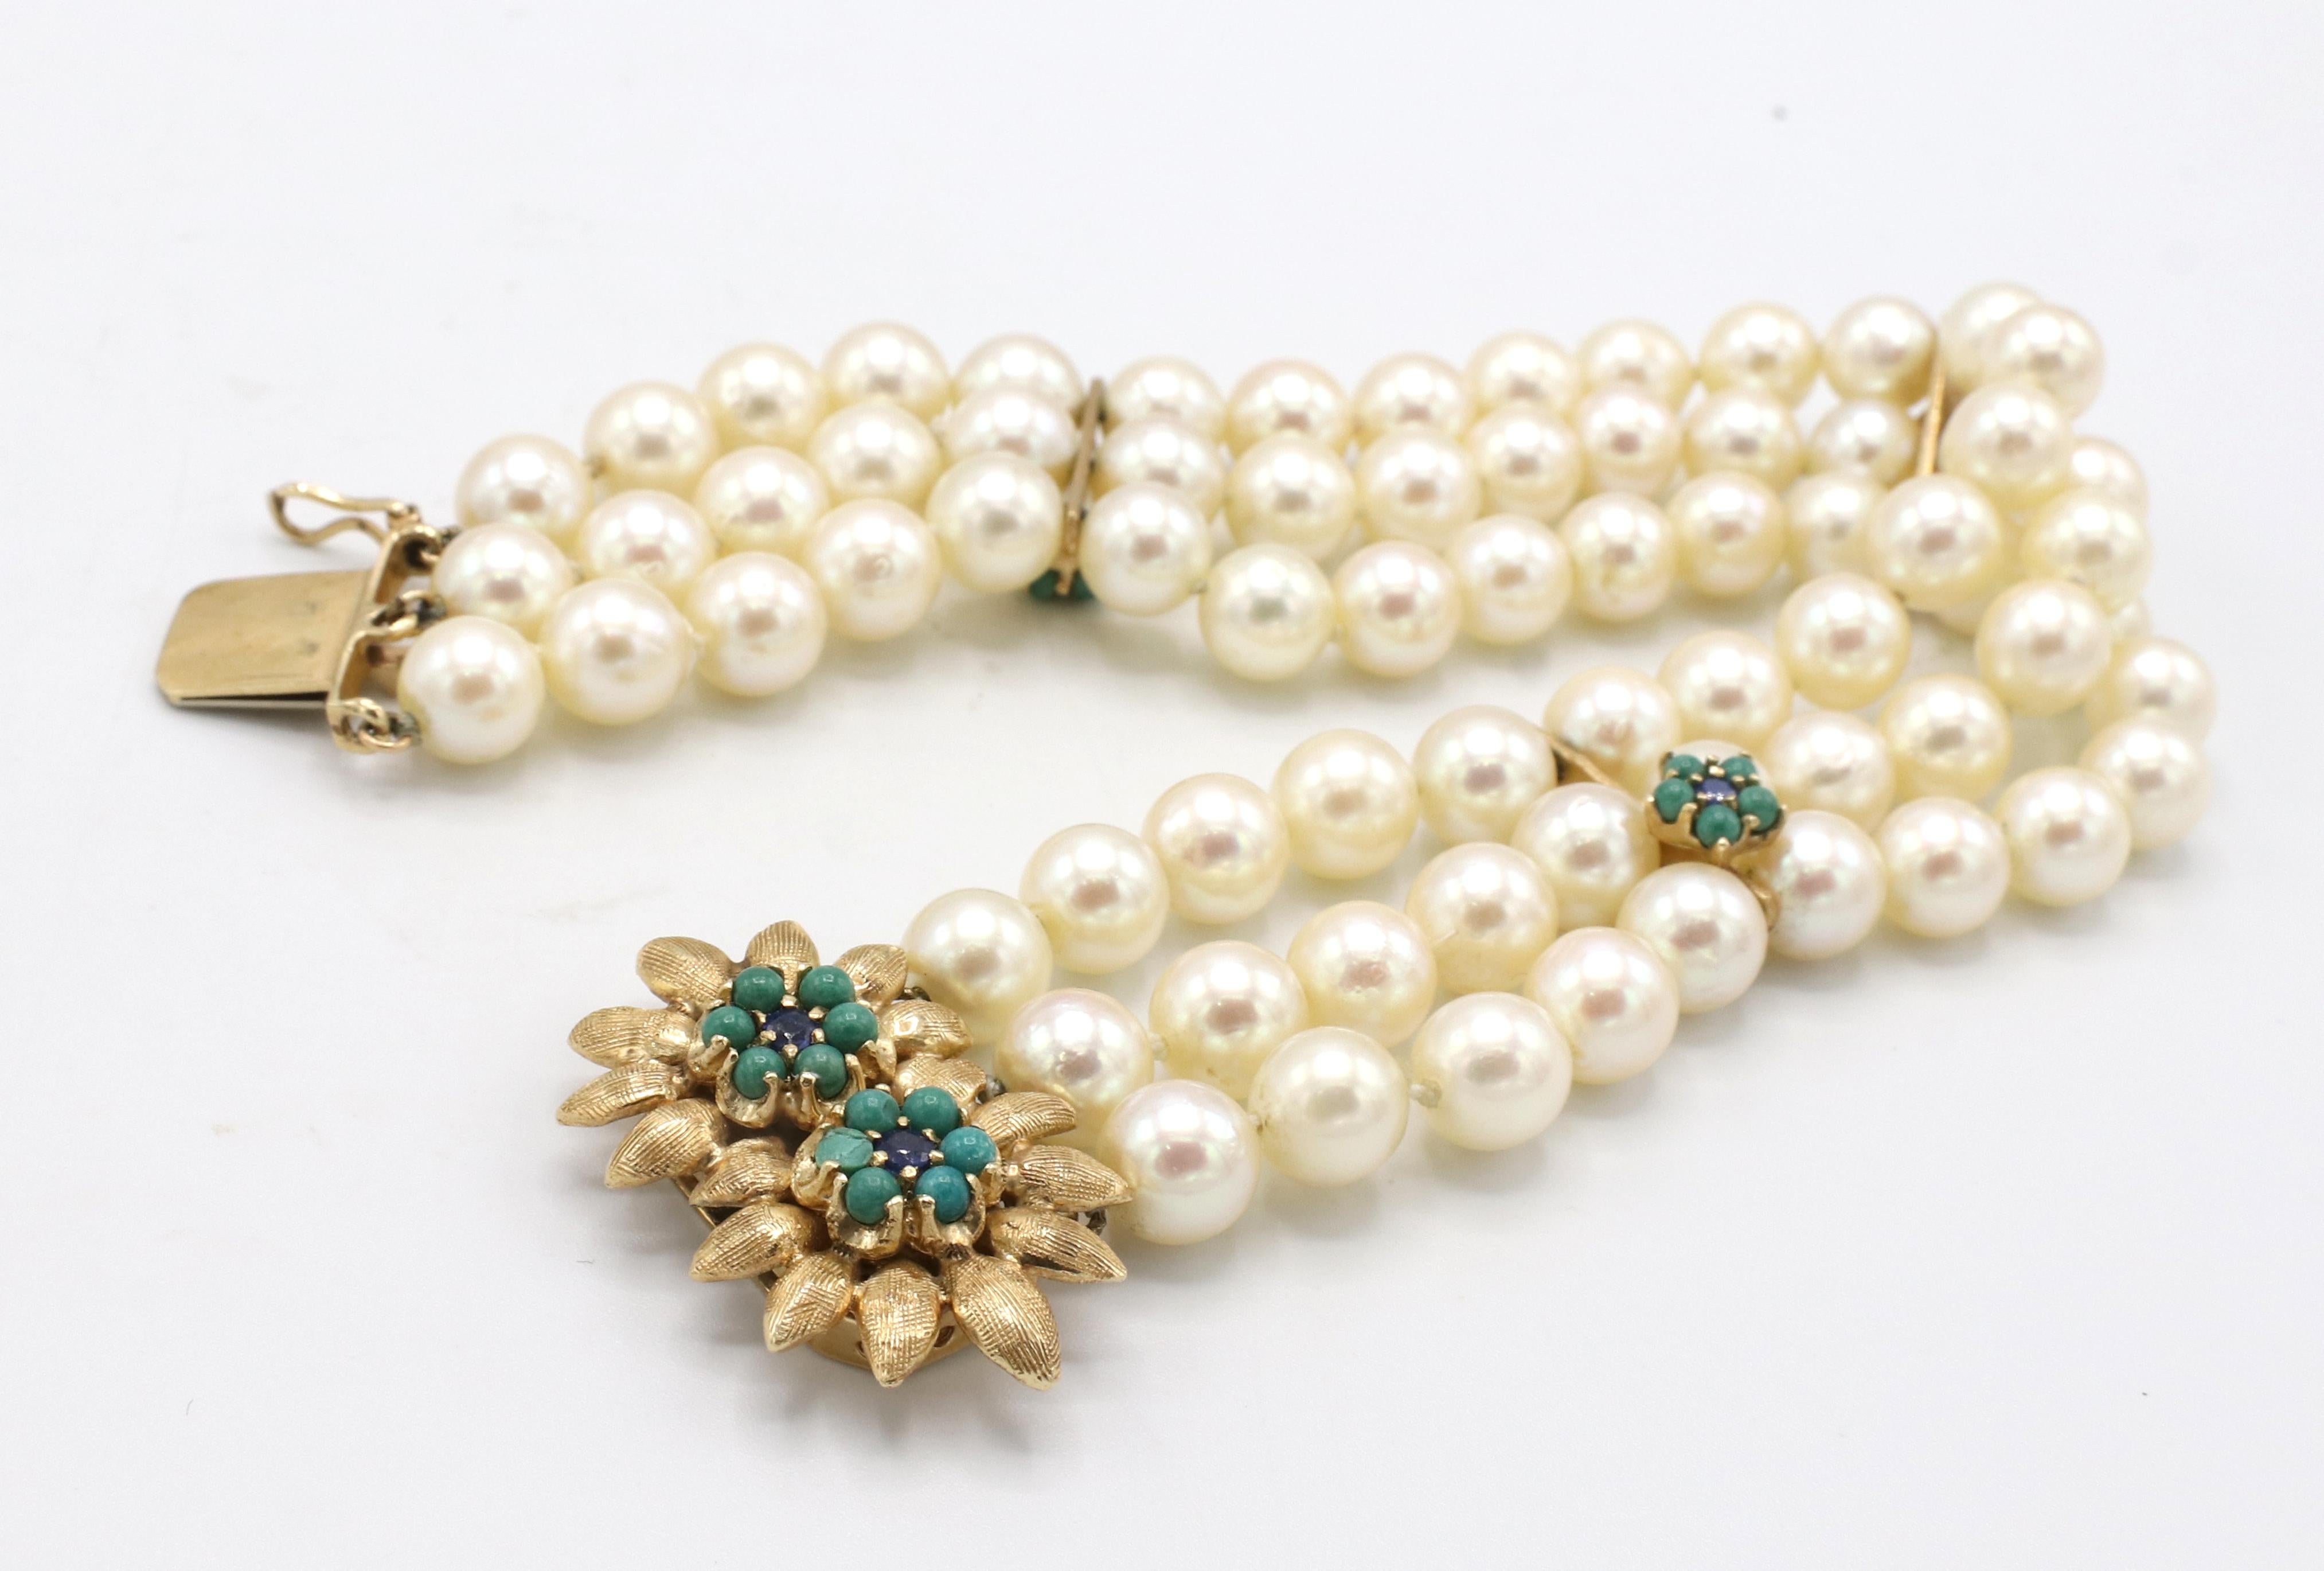 Retro Three Row Multi Strand Pearl Bracelet With 14 Karat Gold, Turquoise and Blue Sapphire Clasp 
Metal: 14k yellow gold
Weight: 40.6 grams
Length: 7.25 inches
Width: 0.75 inches 
Gemstones: Turquoise (2 stones chipped) and blue sapphires


